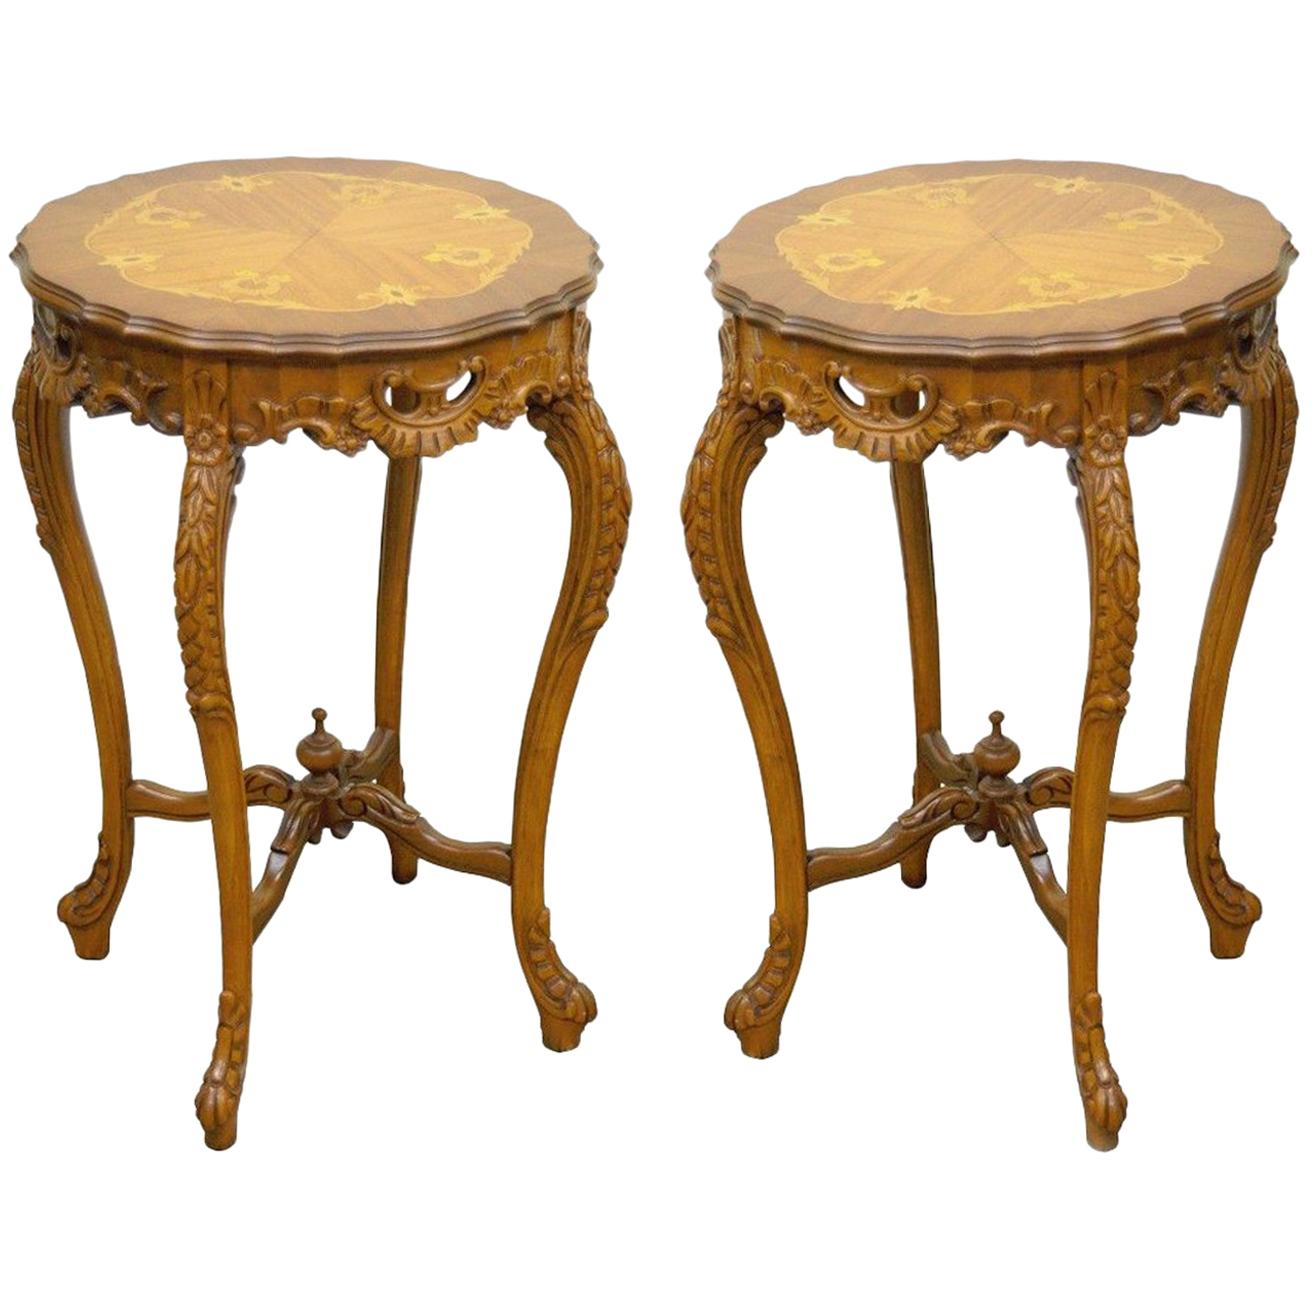 Pair of Antique French Floral Satinwood Inlaid Round End Tables Carved Walnut